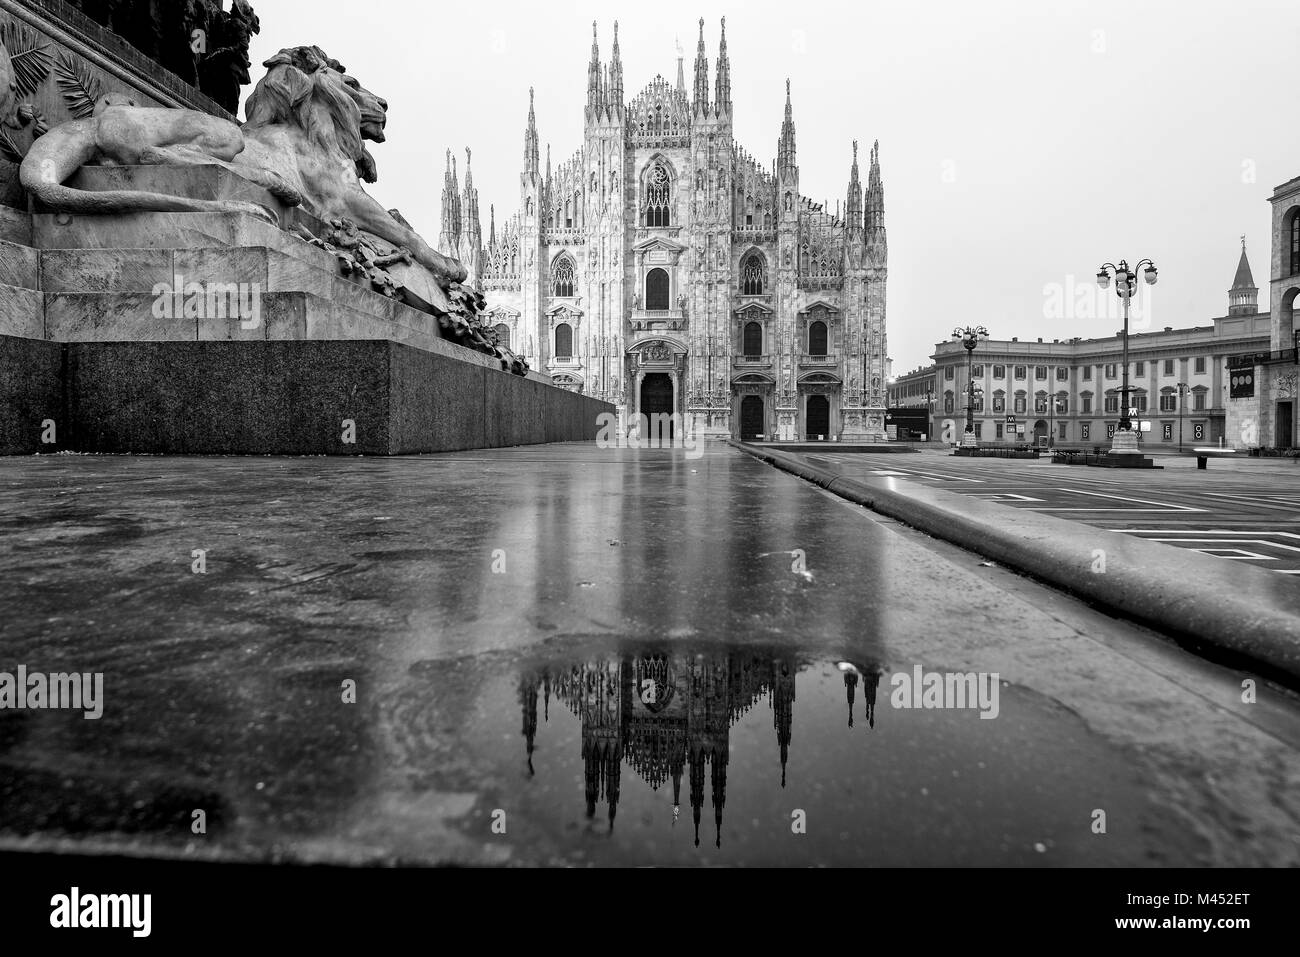 Royal palace of milan Black and White Stock Photos & Images - Alamy